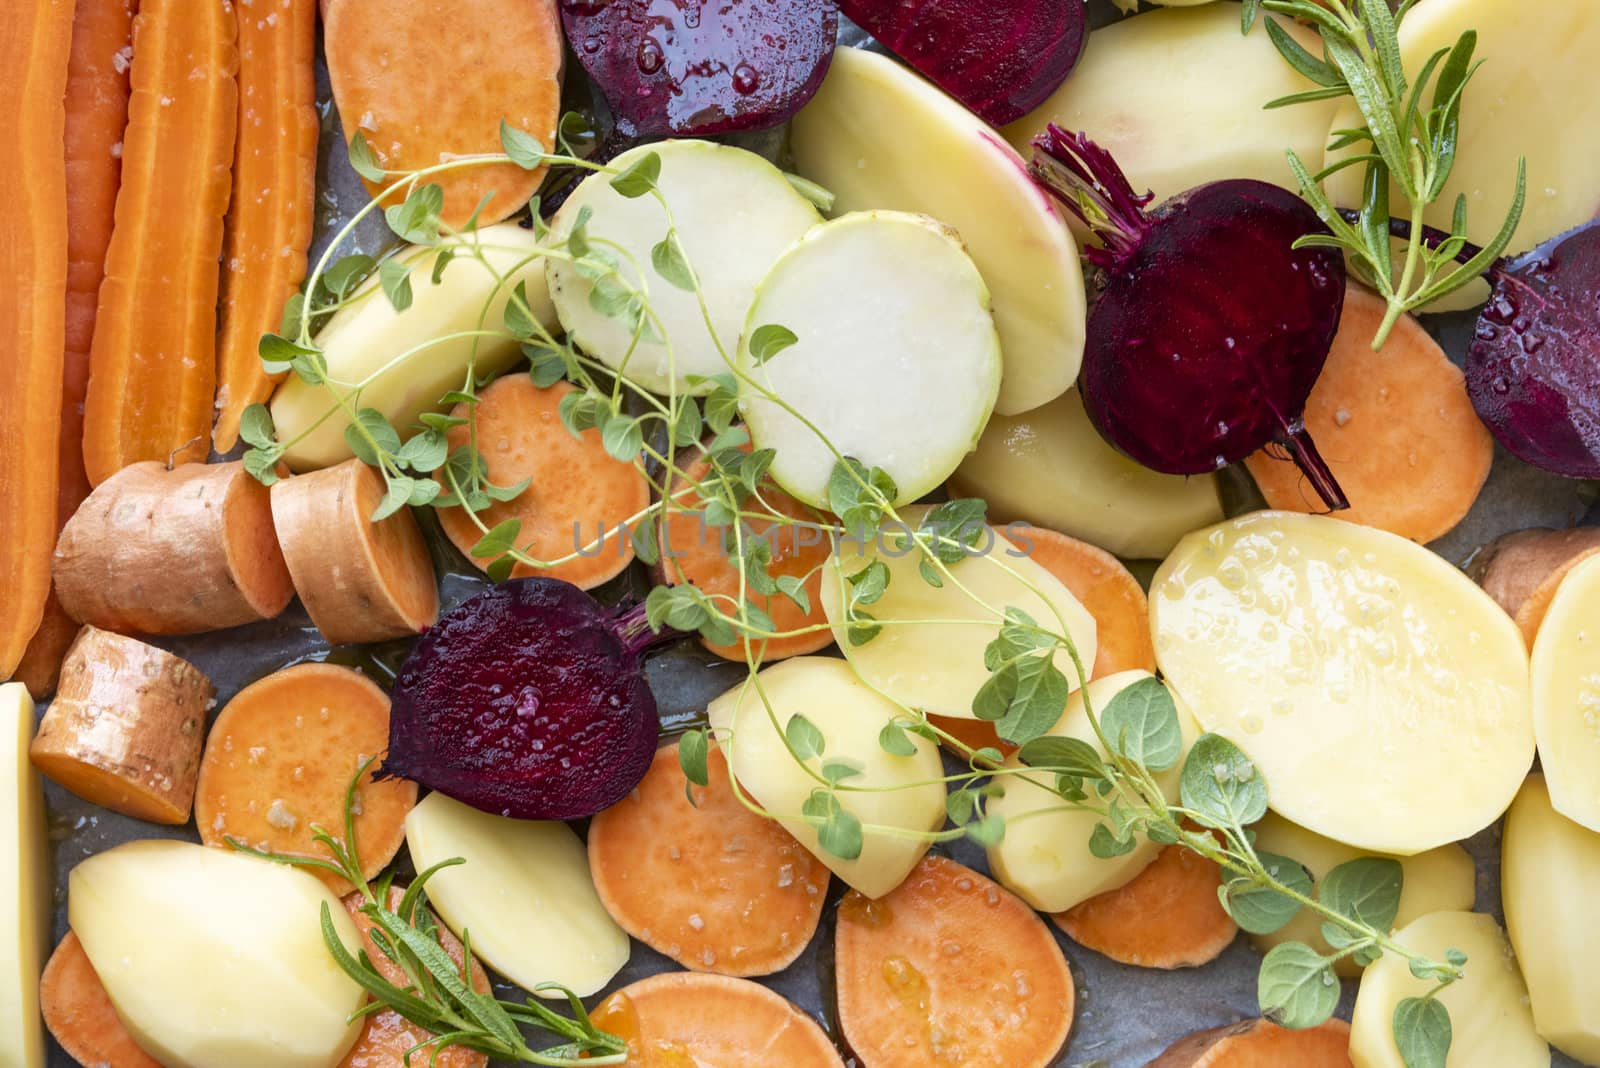 Cut raw vegetables before putting them in the oven. Carrots, potatoes, sweet potatoes, beets, kohlrabi, rosemary, garlic, hyssop